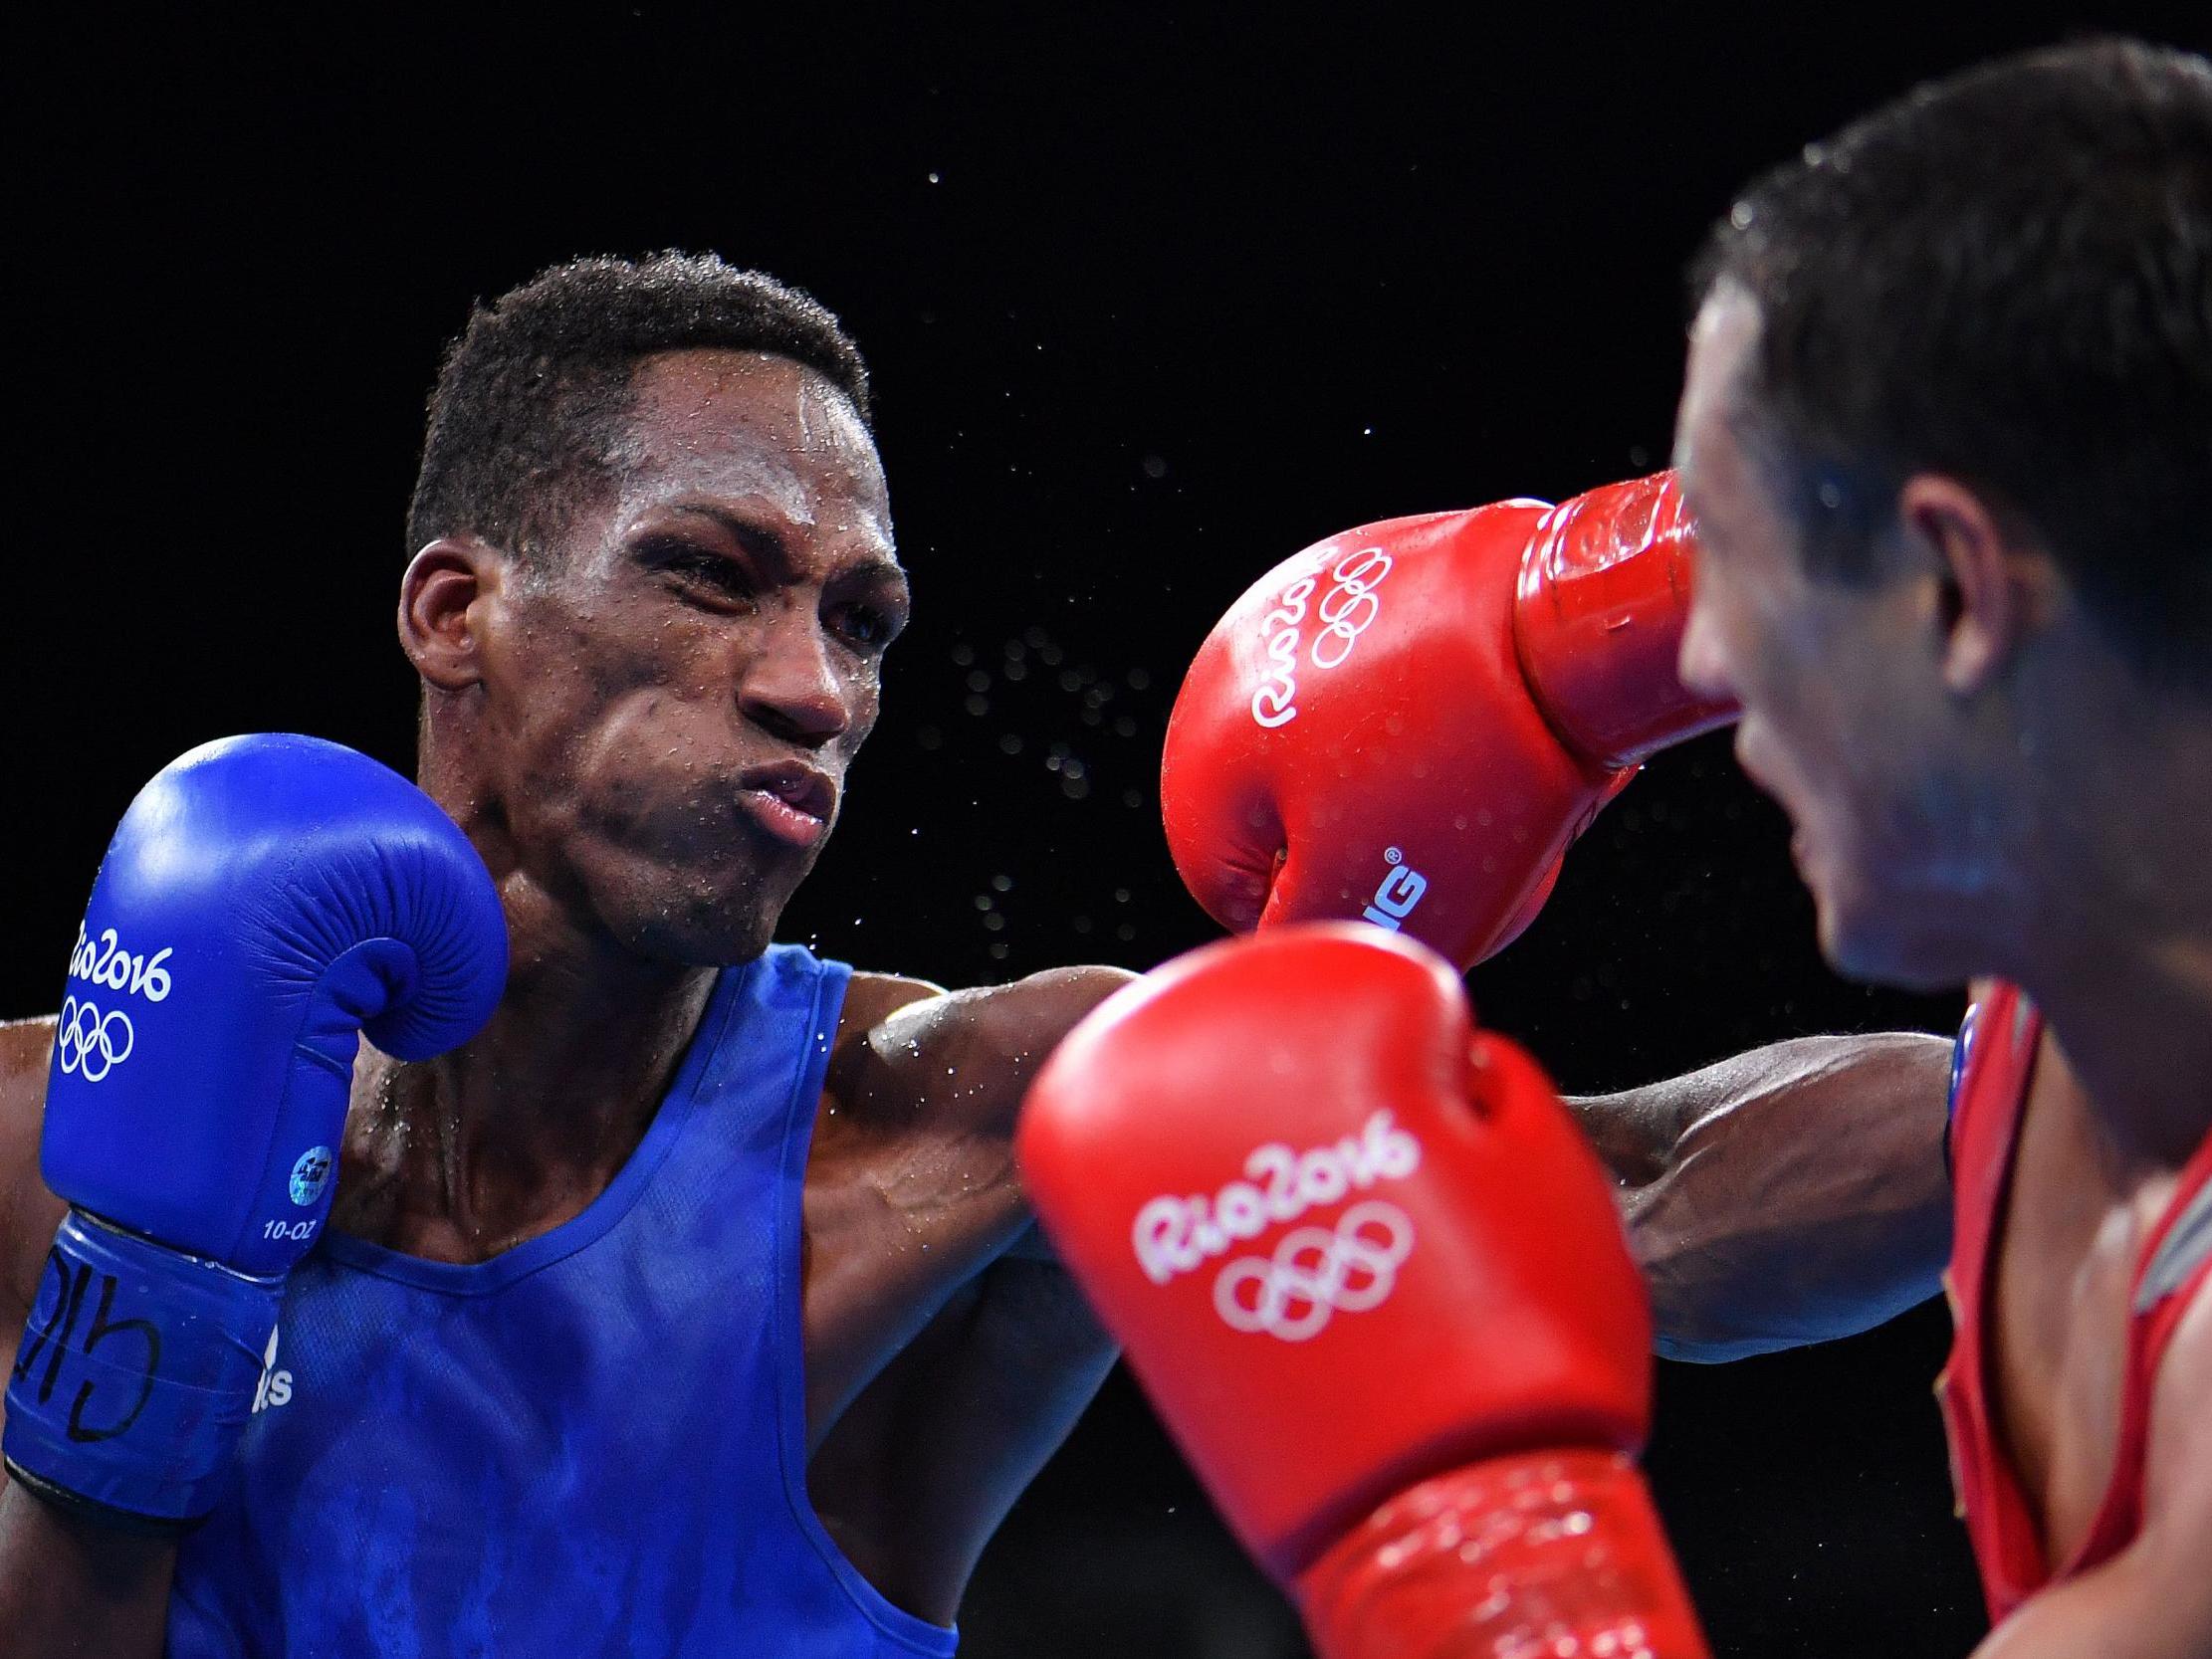 Boxing’s place at the Olympics is now in jeopardy